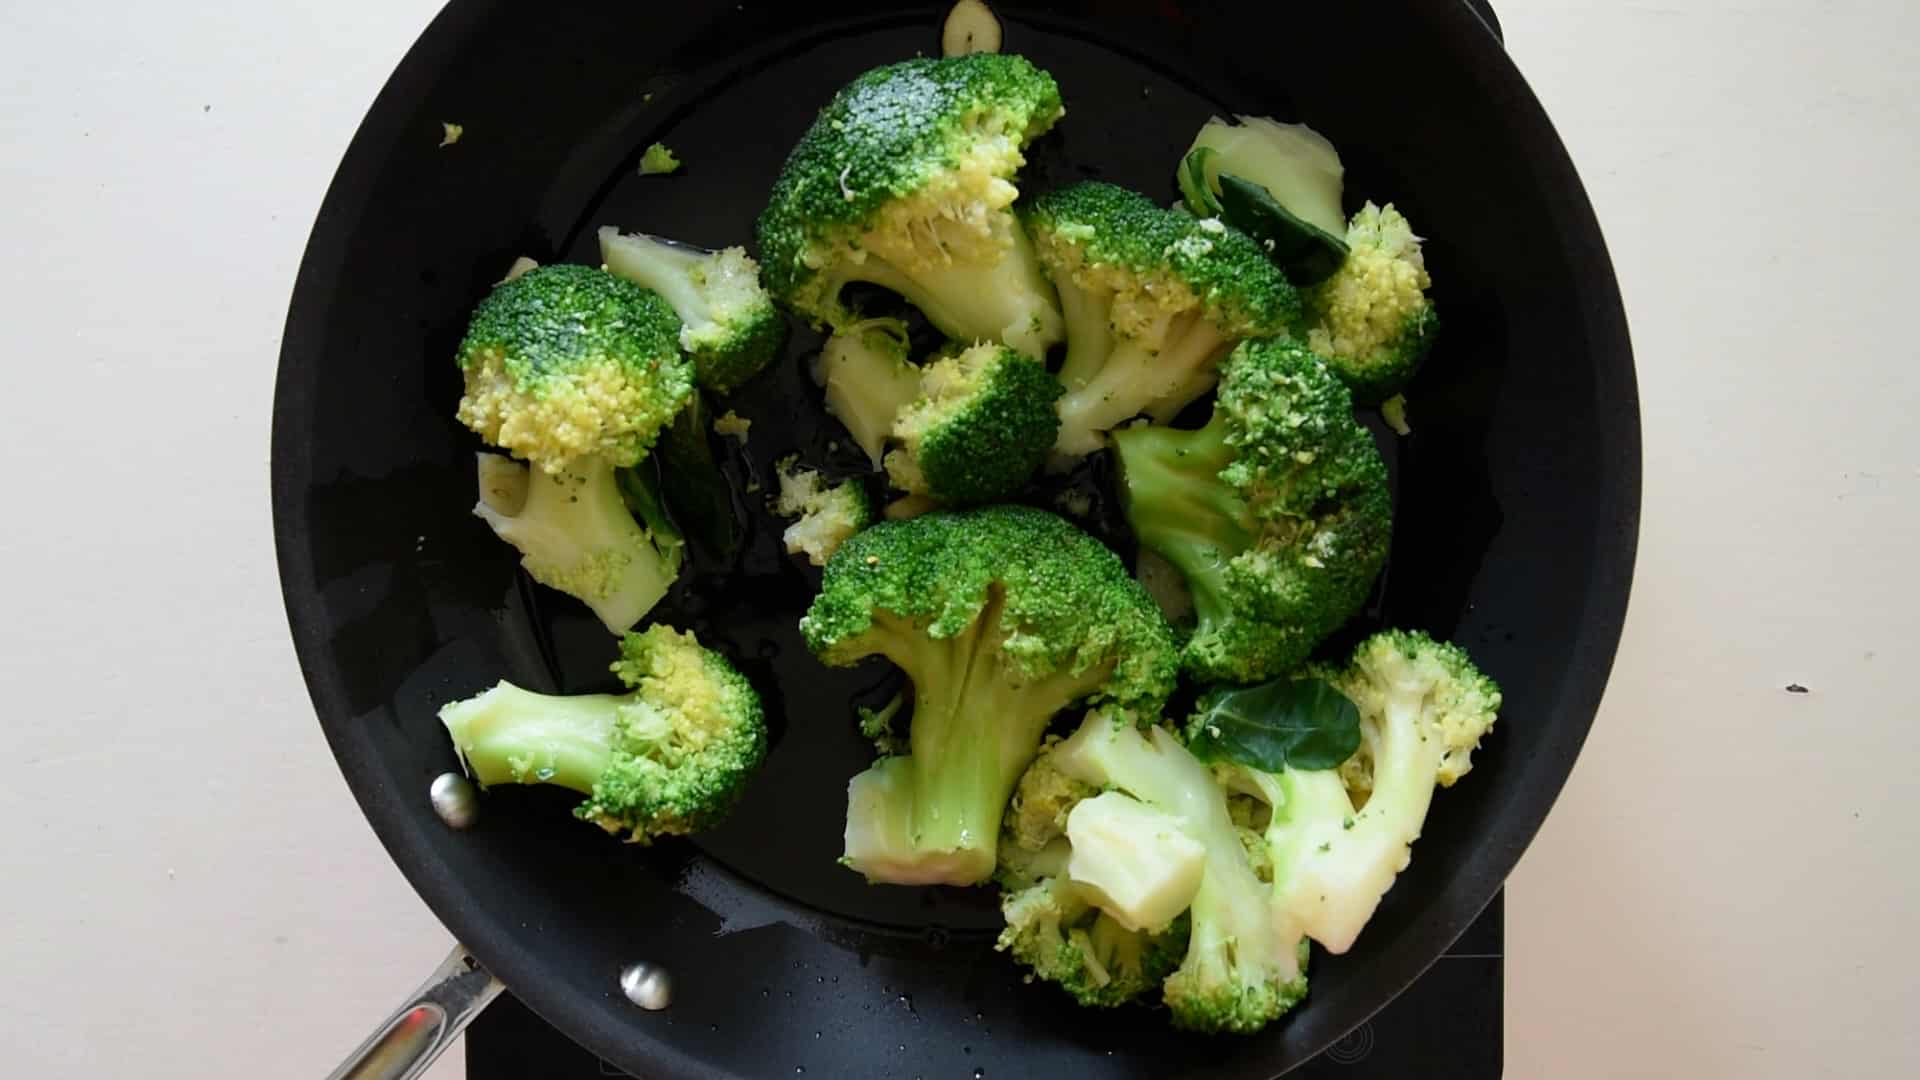 Stir fry the broccoli with the garlic and the chili flakes